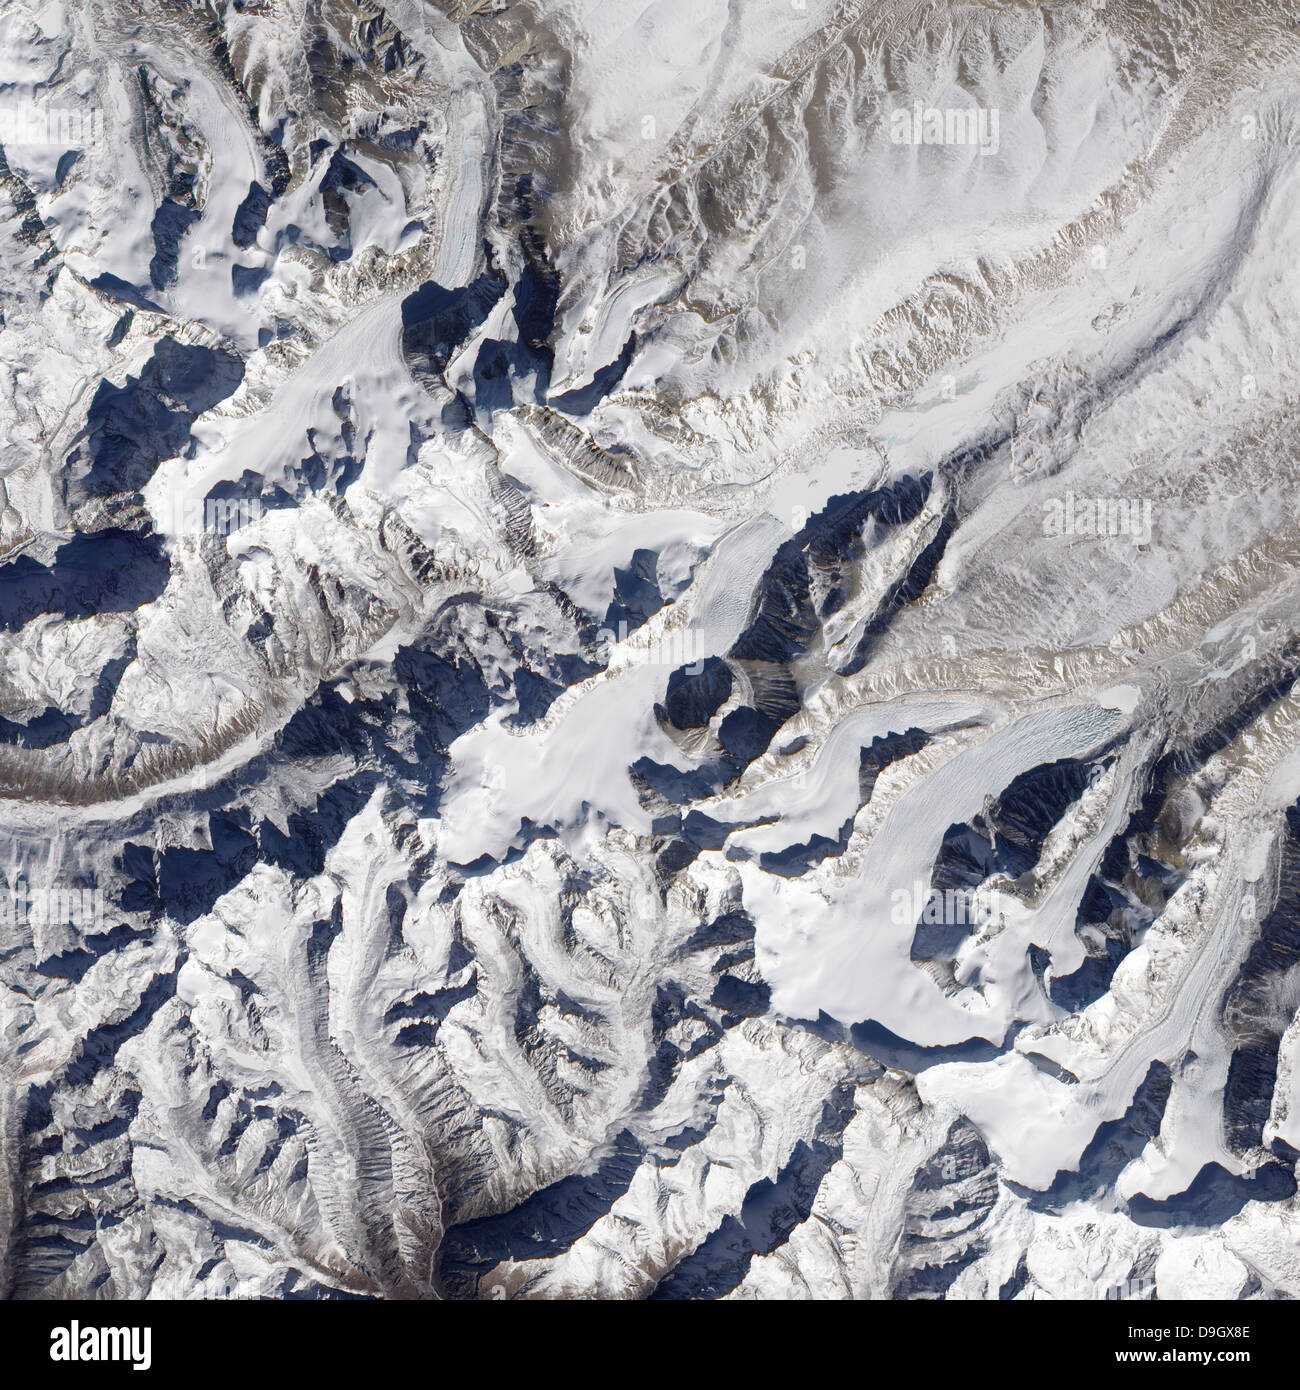 Satellite view of a Himalayan glacier surrounded by mountains. Stock Photo